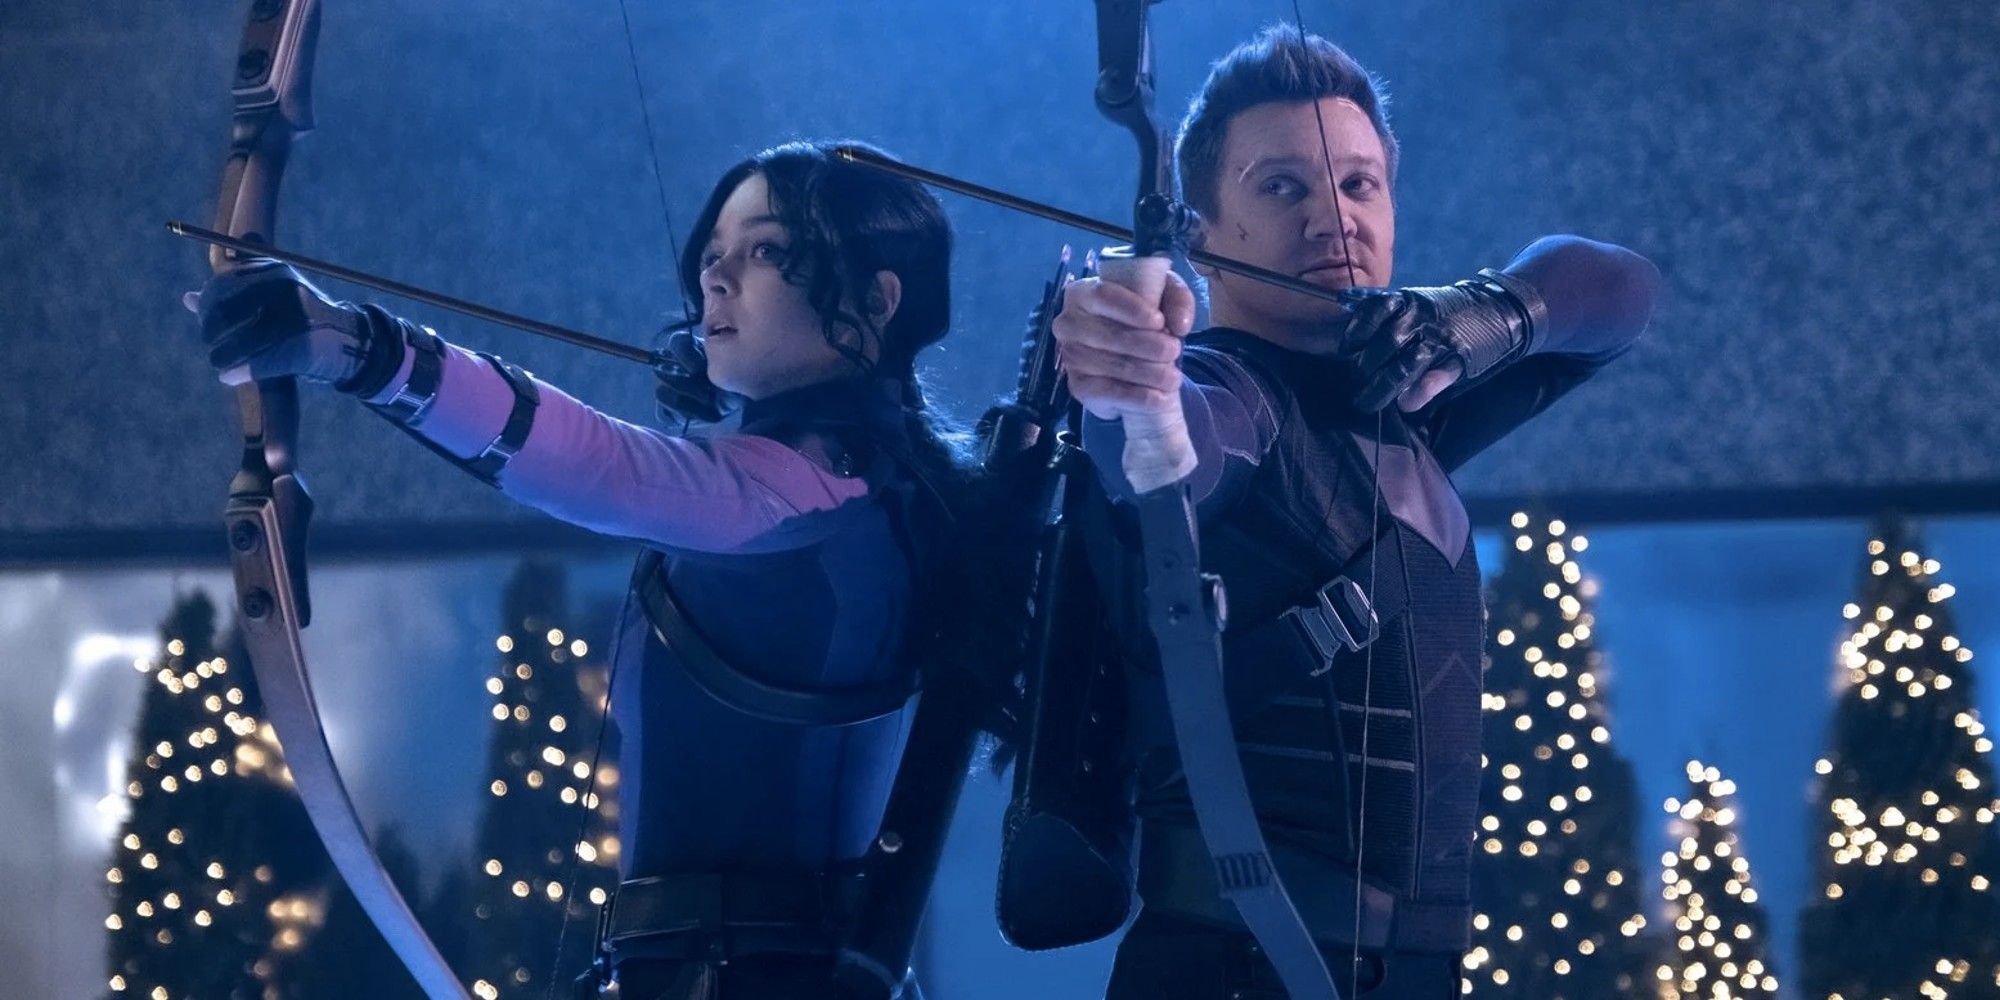 Kate Bishop and Clint Barton head to bow and arrow in Hawkeye.